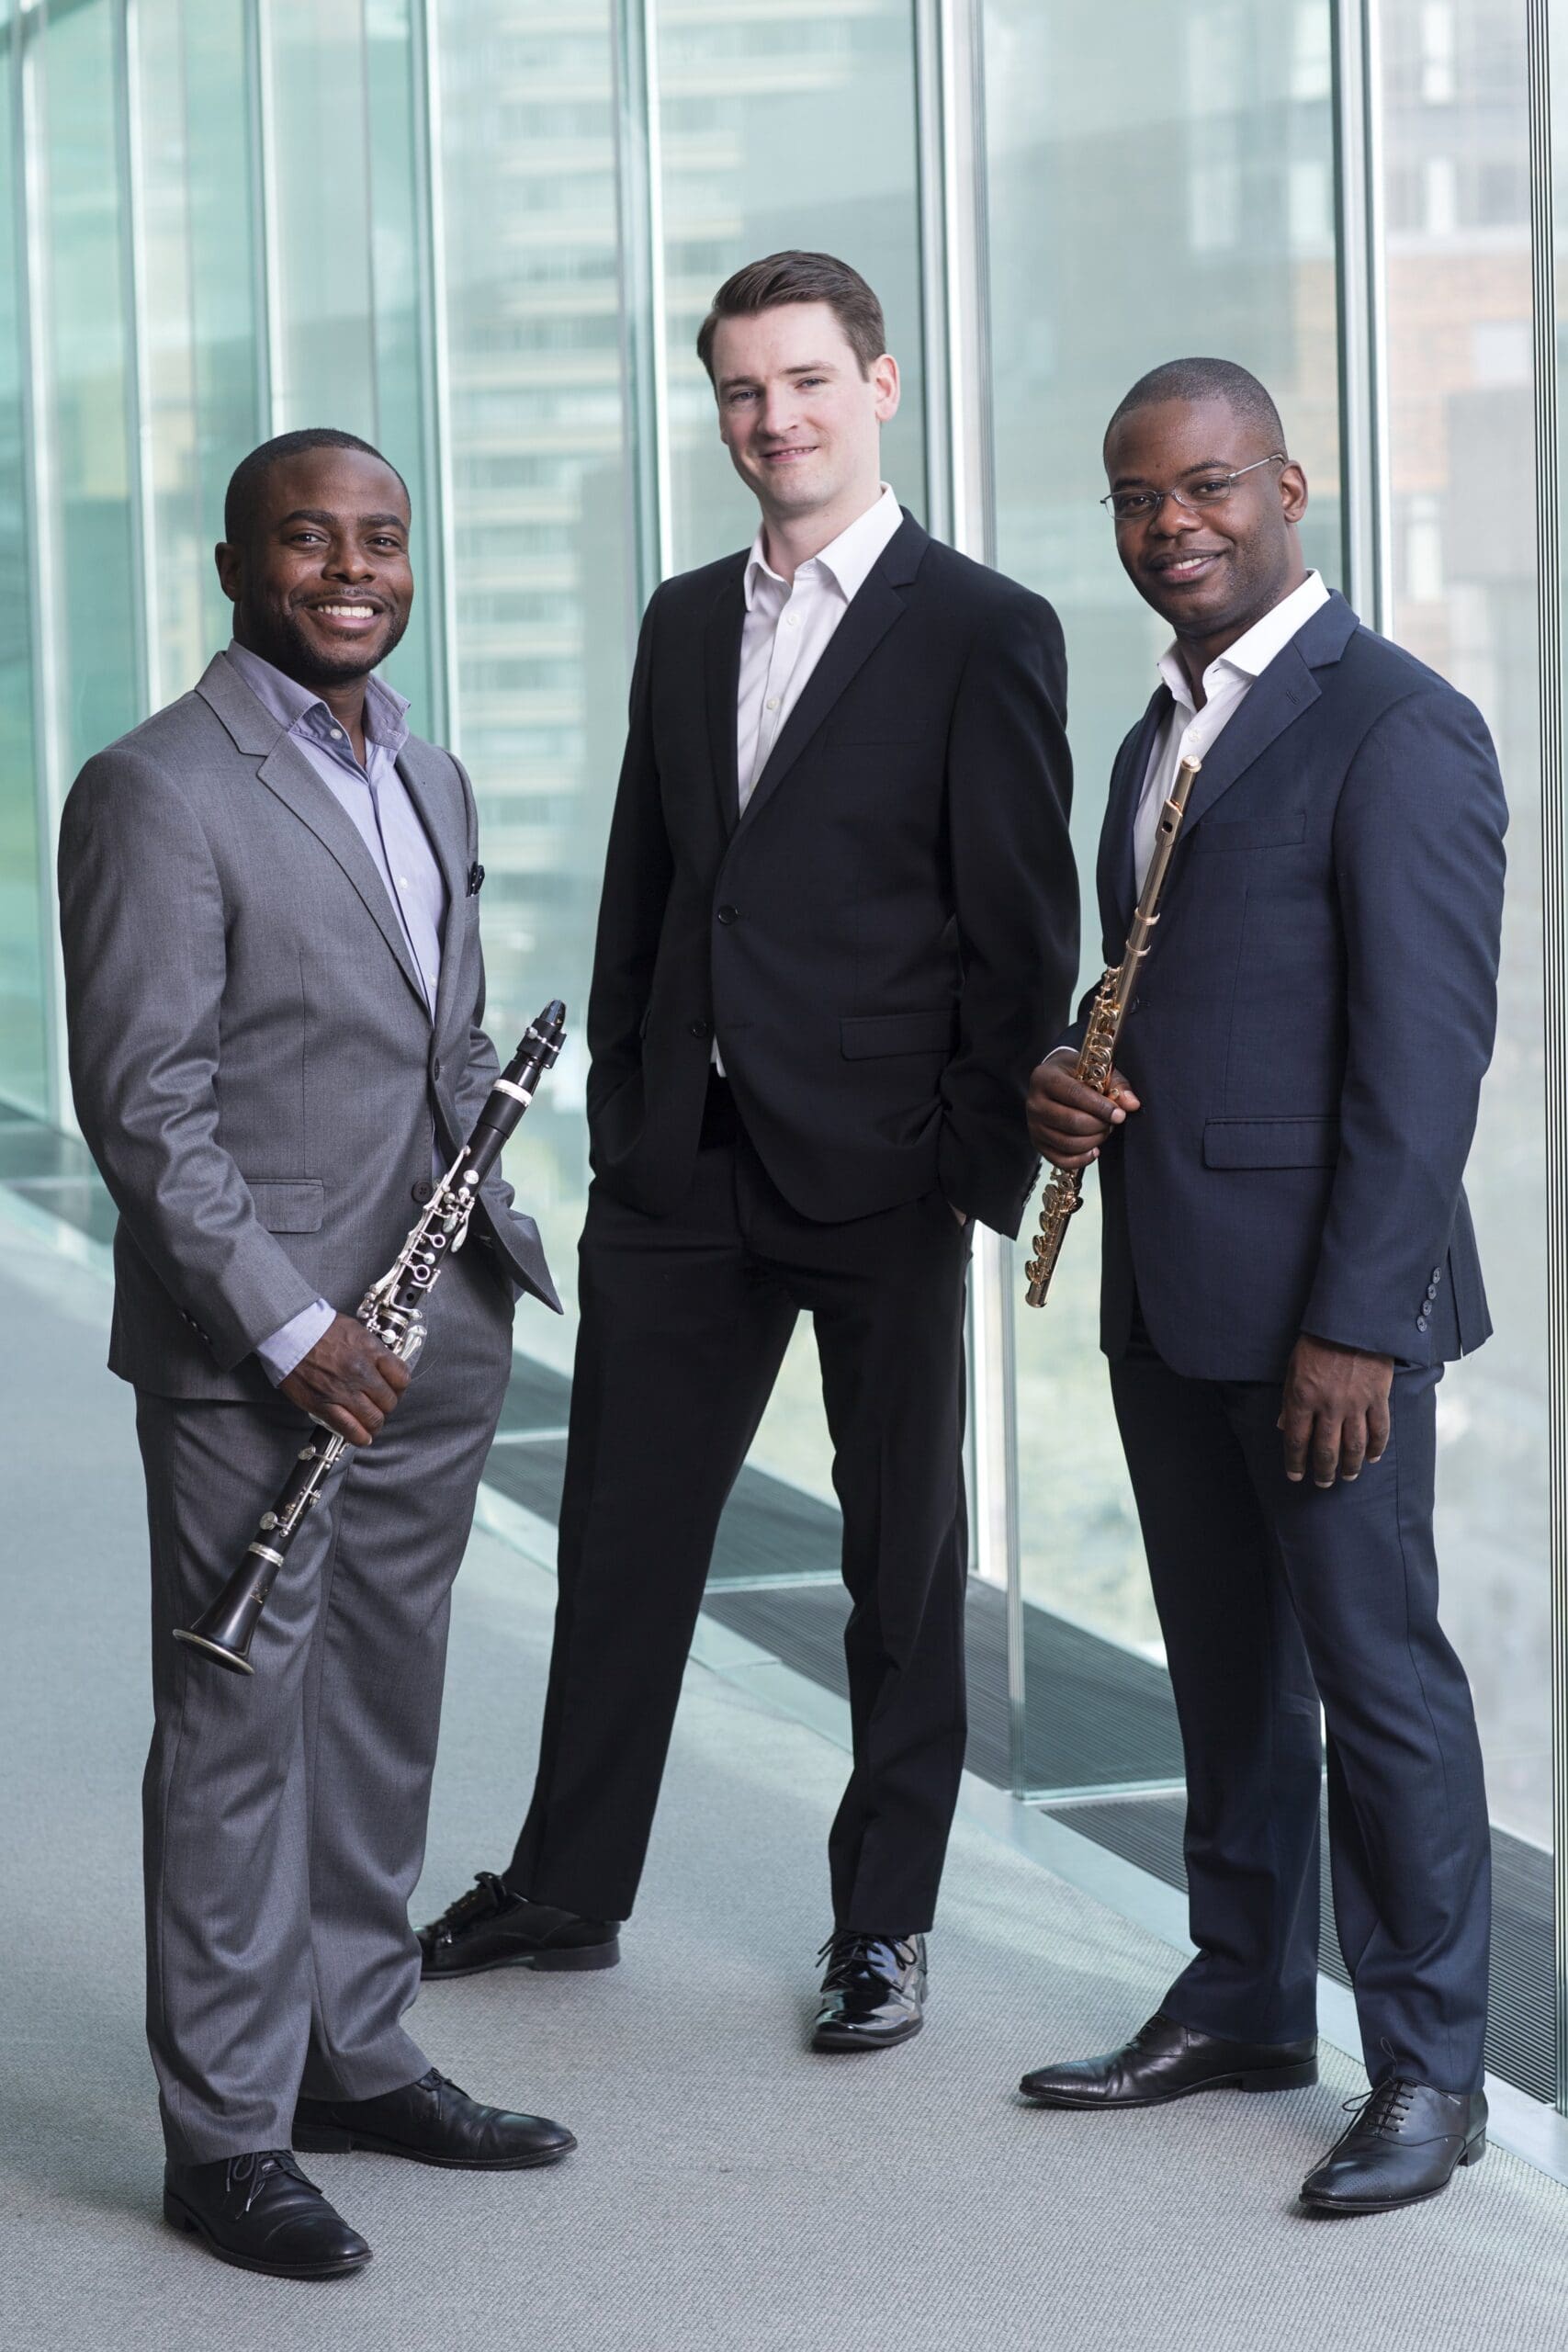 Anthony McGill, Demarre McGill And Michael McHale